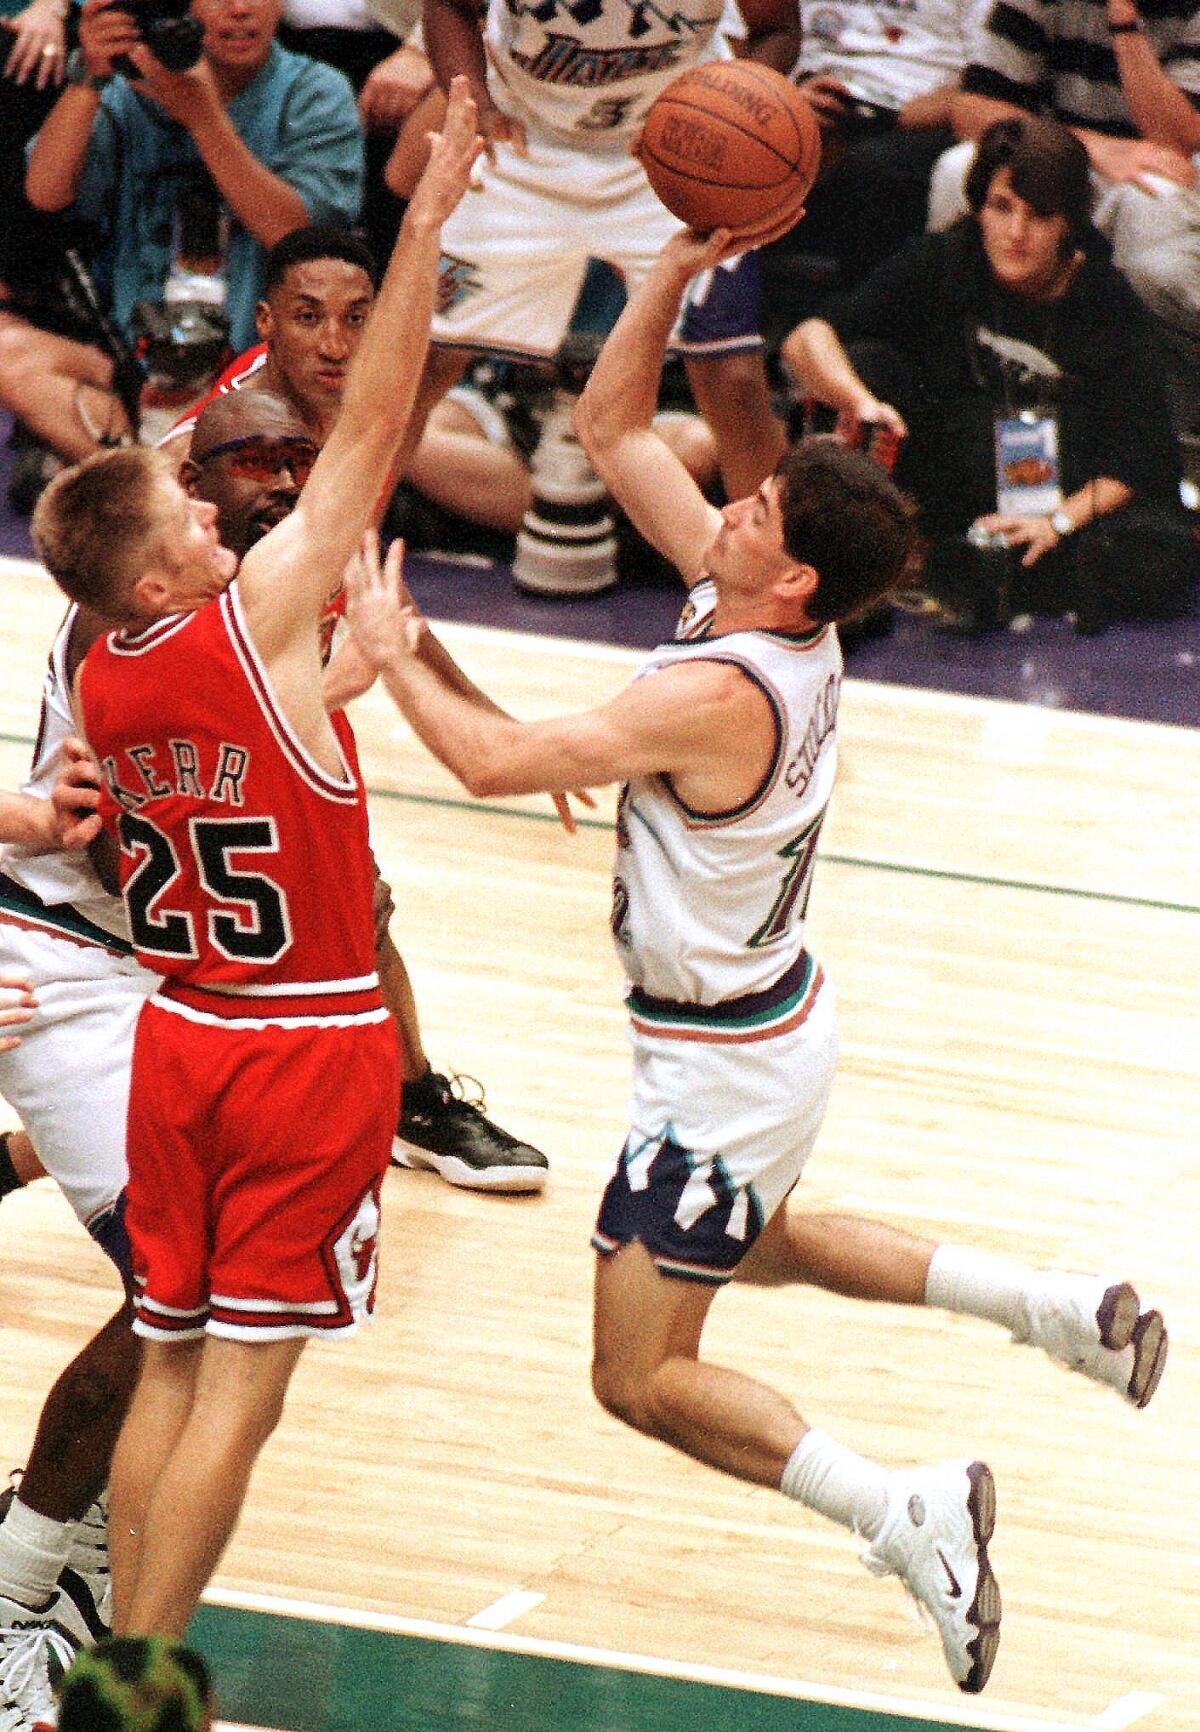 The Bulls' Steve Kerr defends the Jazz's John Stockton as he launches the game-winning shot in overtime of Game 1 in the 1998 NBA Finals.